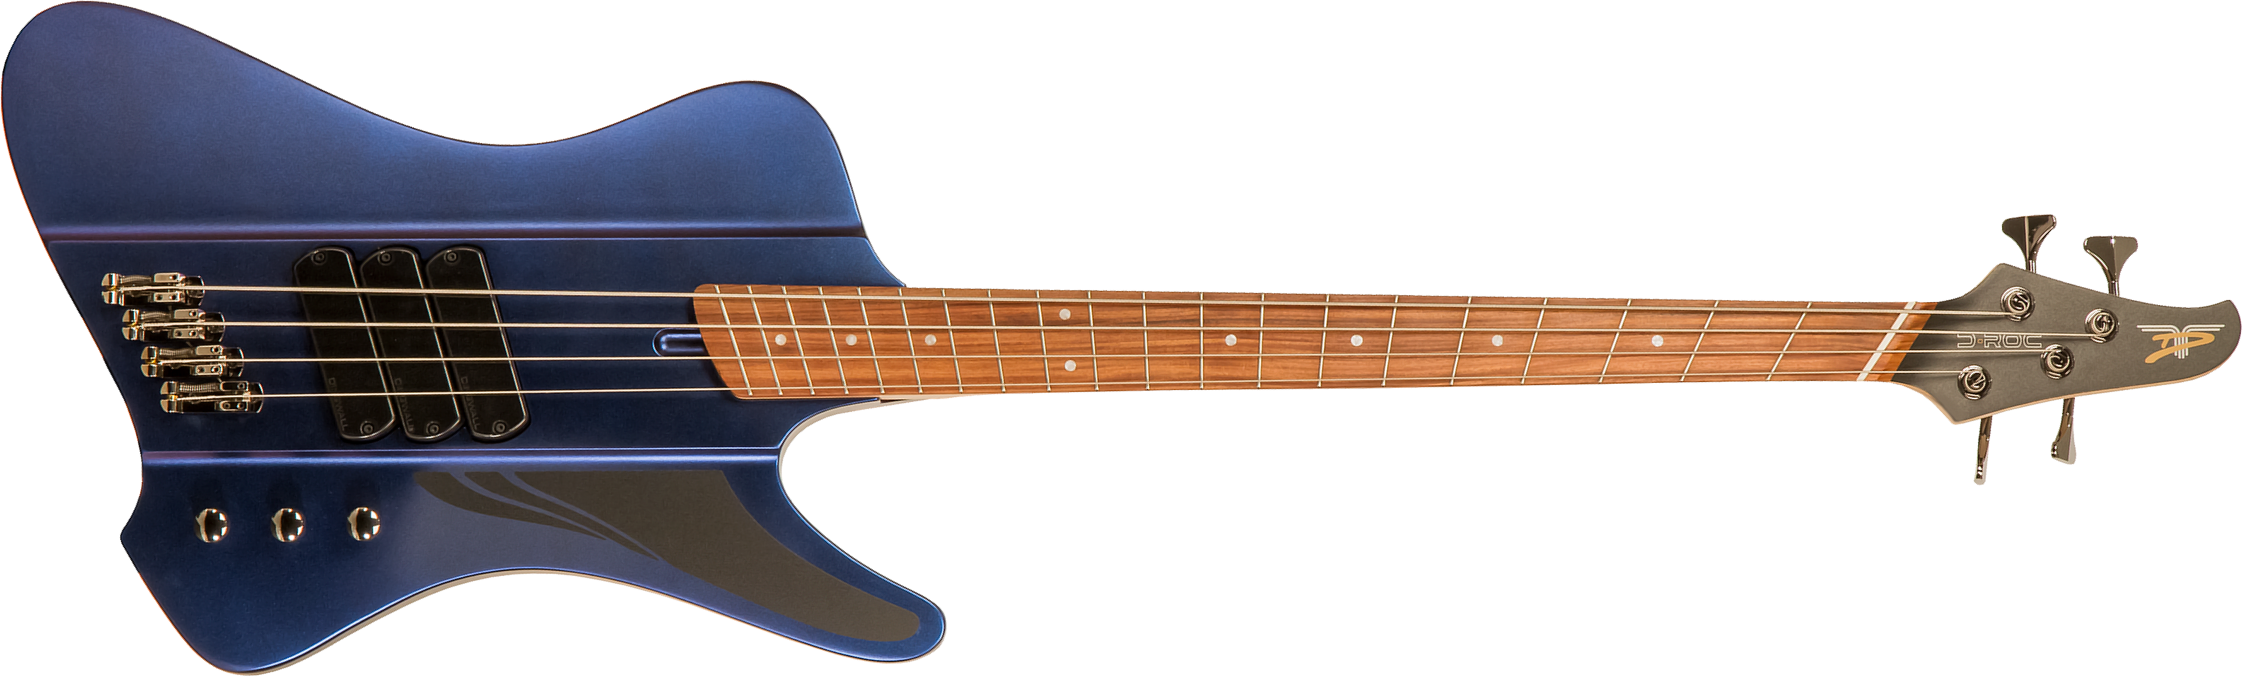 Dingwall D-roc Standard 4c 3-pickups Pf - Blue To Purple Colorshift - Solidbody E-bass - Main picture